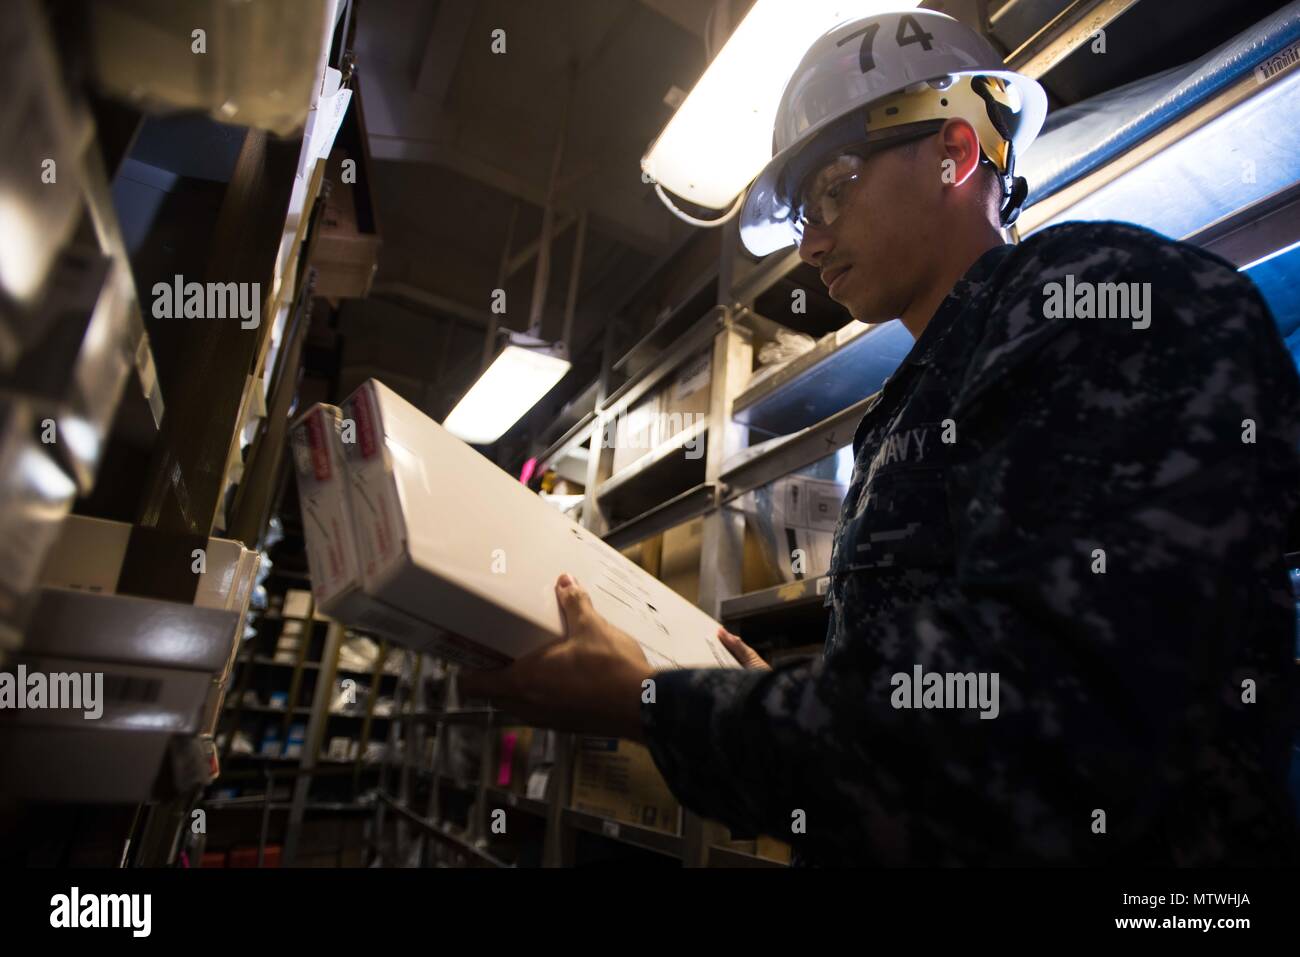 170130-N-BR551-022 BREMERTON, Washington (Jan. 30, 2017) Hospital Corpsman 3rd Class Faron Mitchell, from Dallas, inventories medical supplies aboard USS John C. Stennis (CVN 74). John C. Stennis is currently in port preparing for a planned incremental availability. (U.S. Navy photo by Mass Communication Specialist 3rd Class Dakota Rayburn / Released) Stock Photo